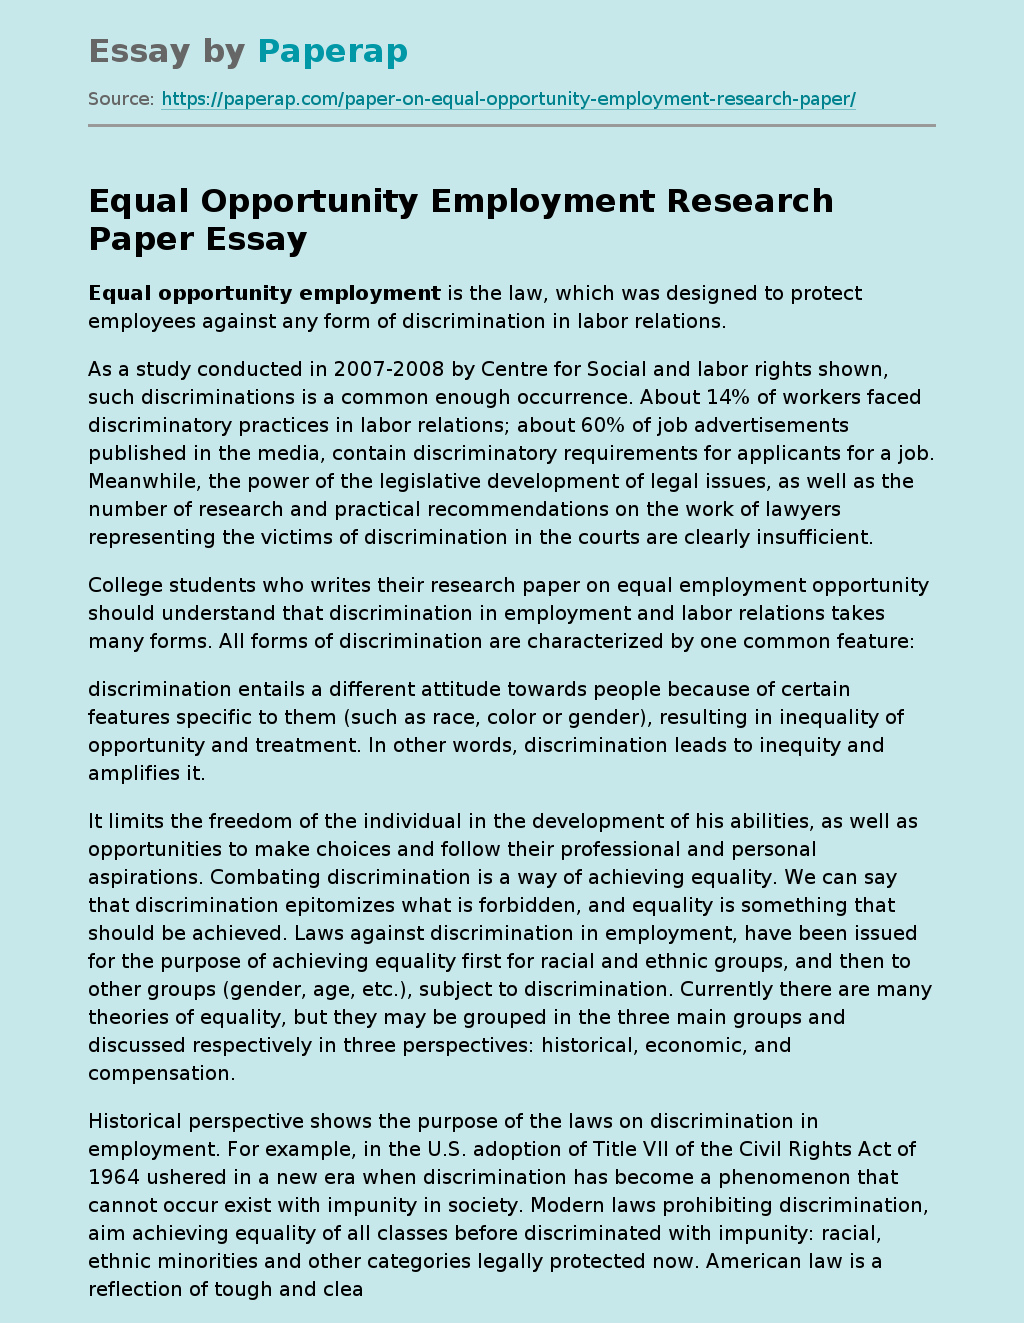 Equal Opportunity Employment Research Paper